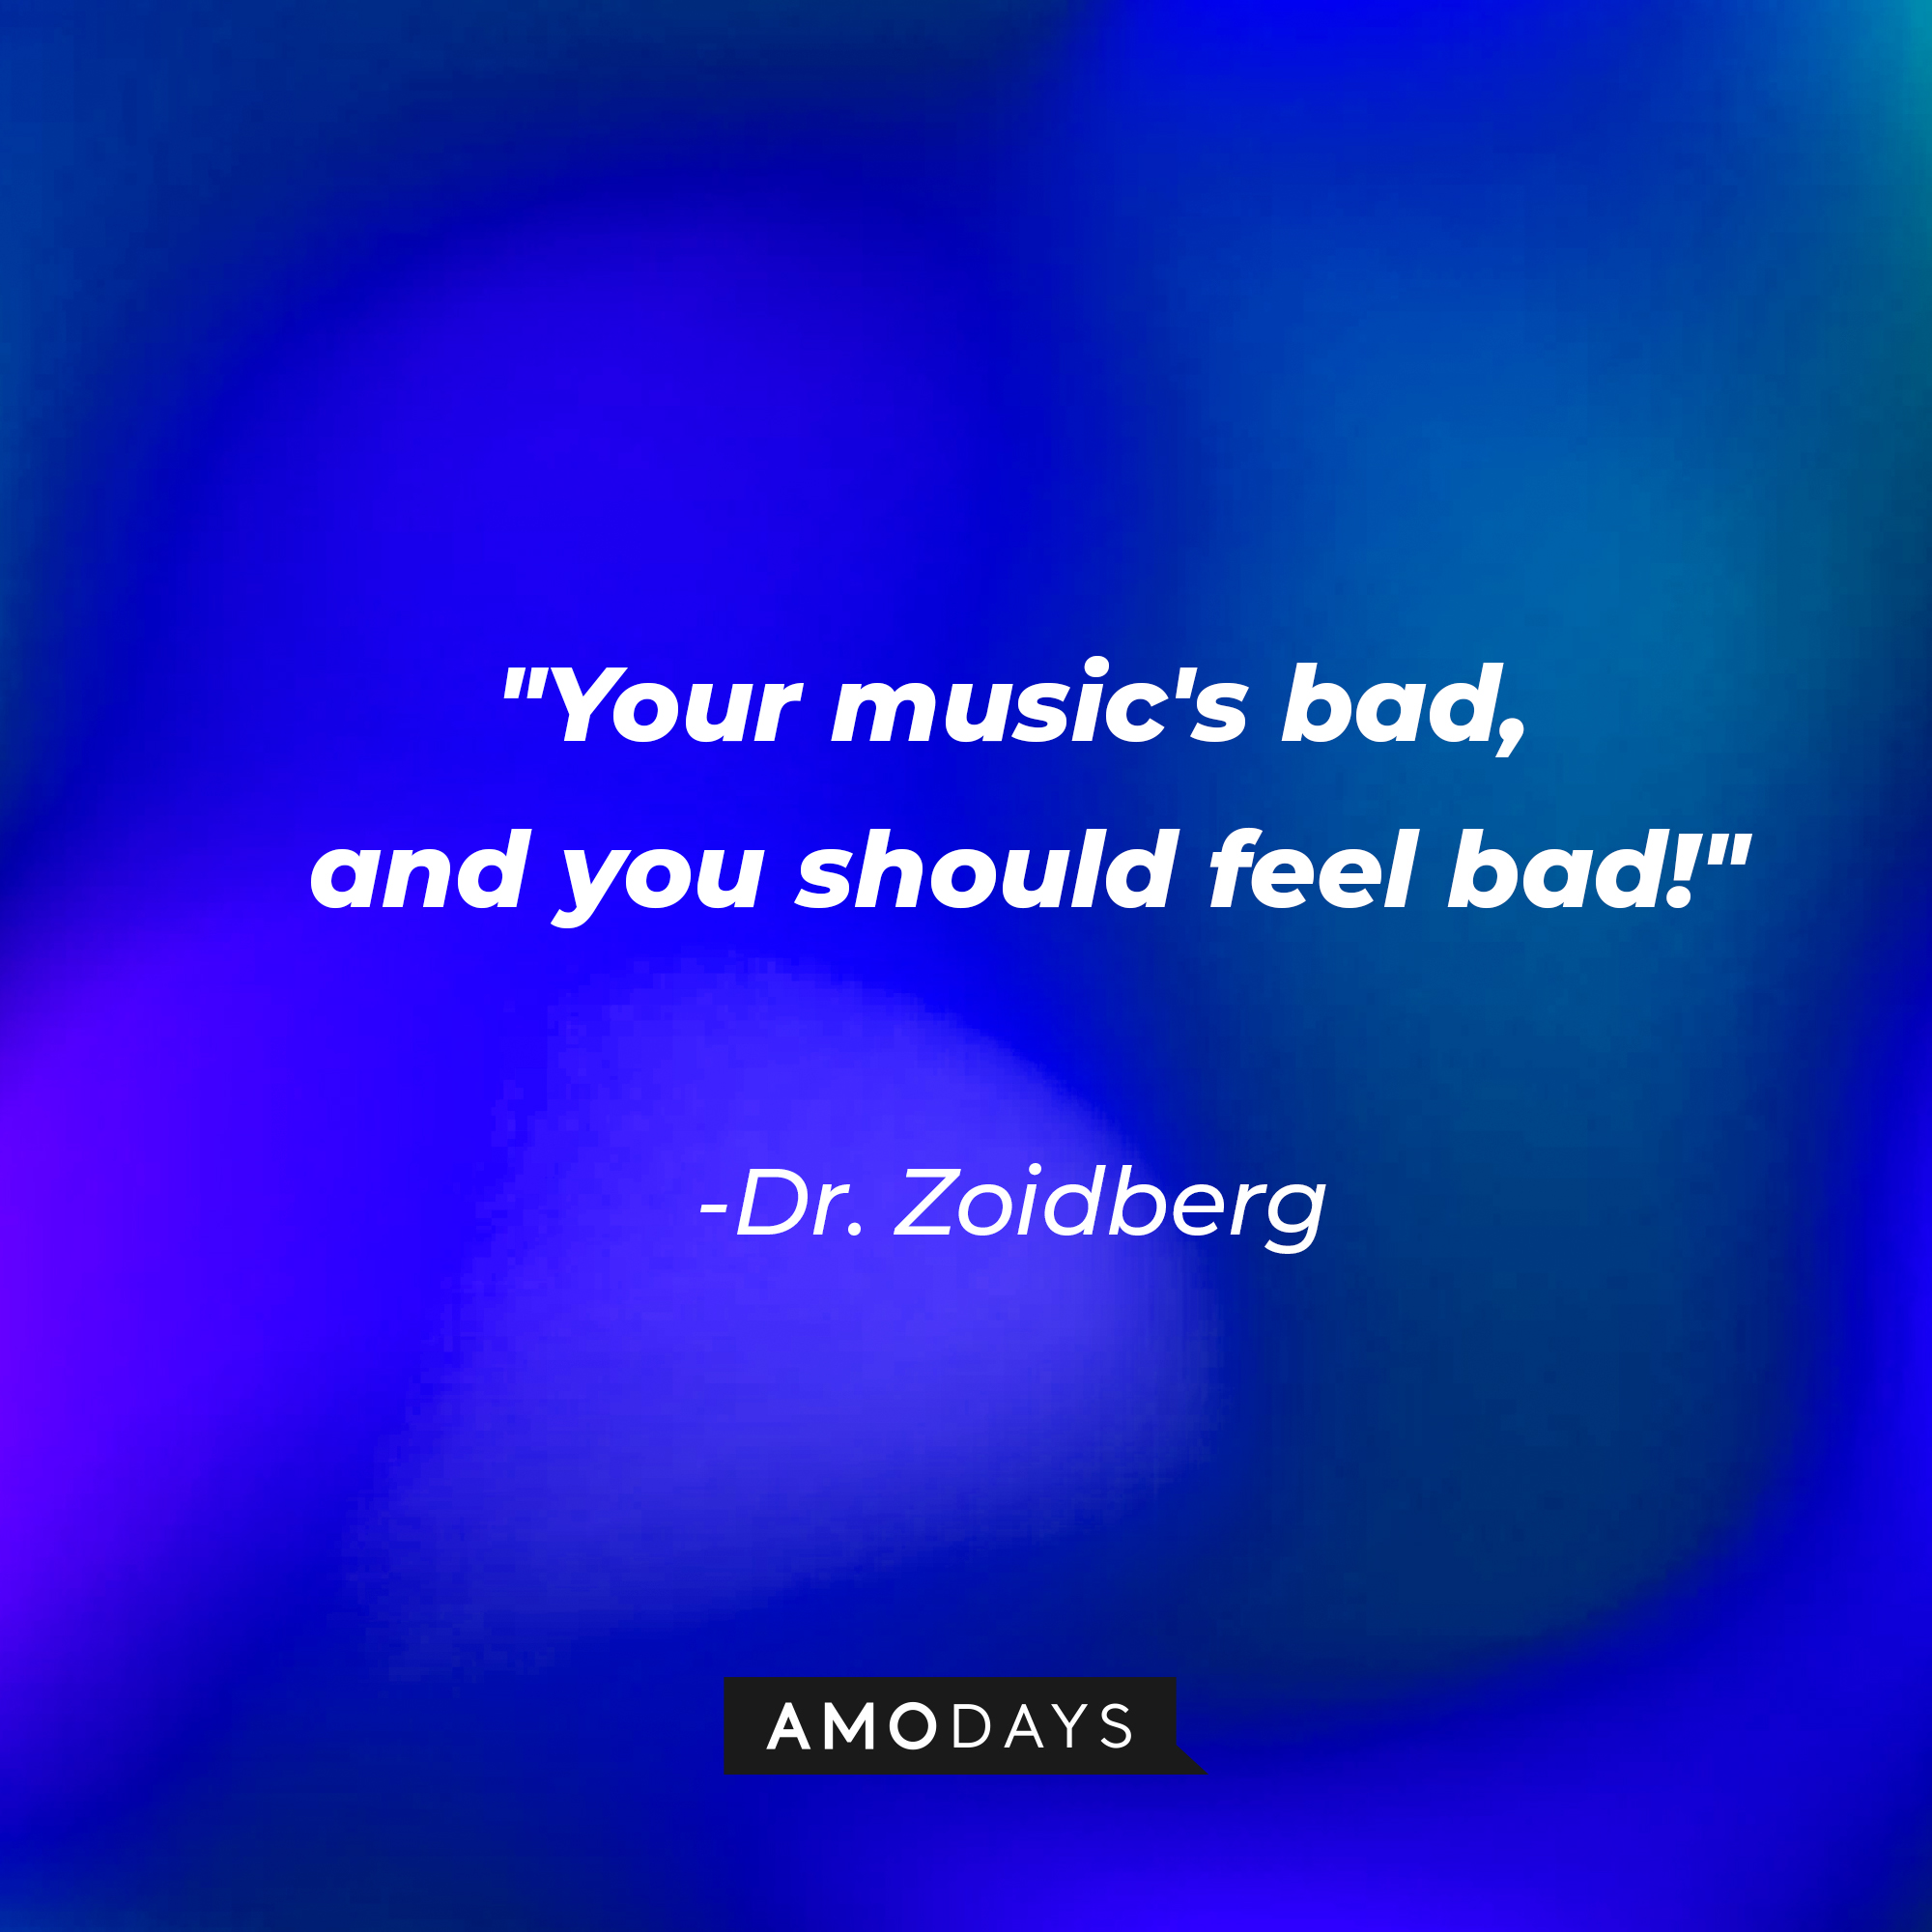 Dr. Zoidberg's quote: "Your music's bad, and you should feel bad!" | Source: AmoDays